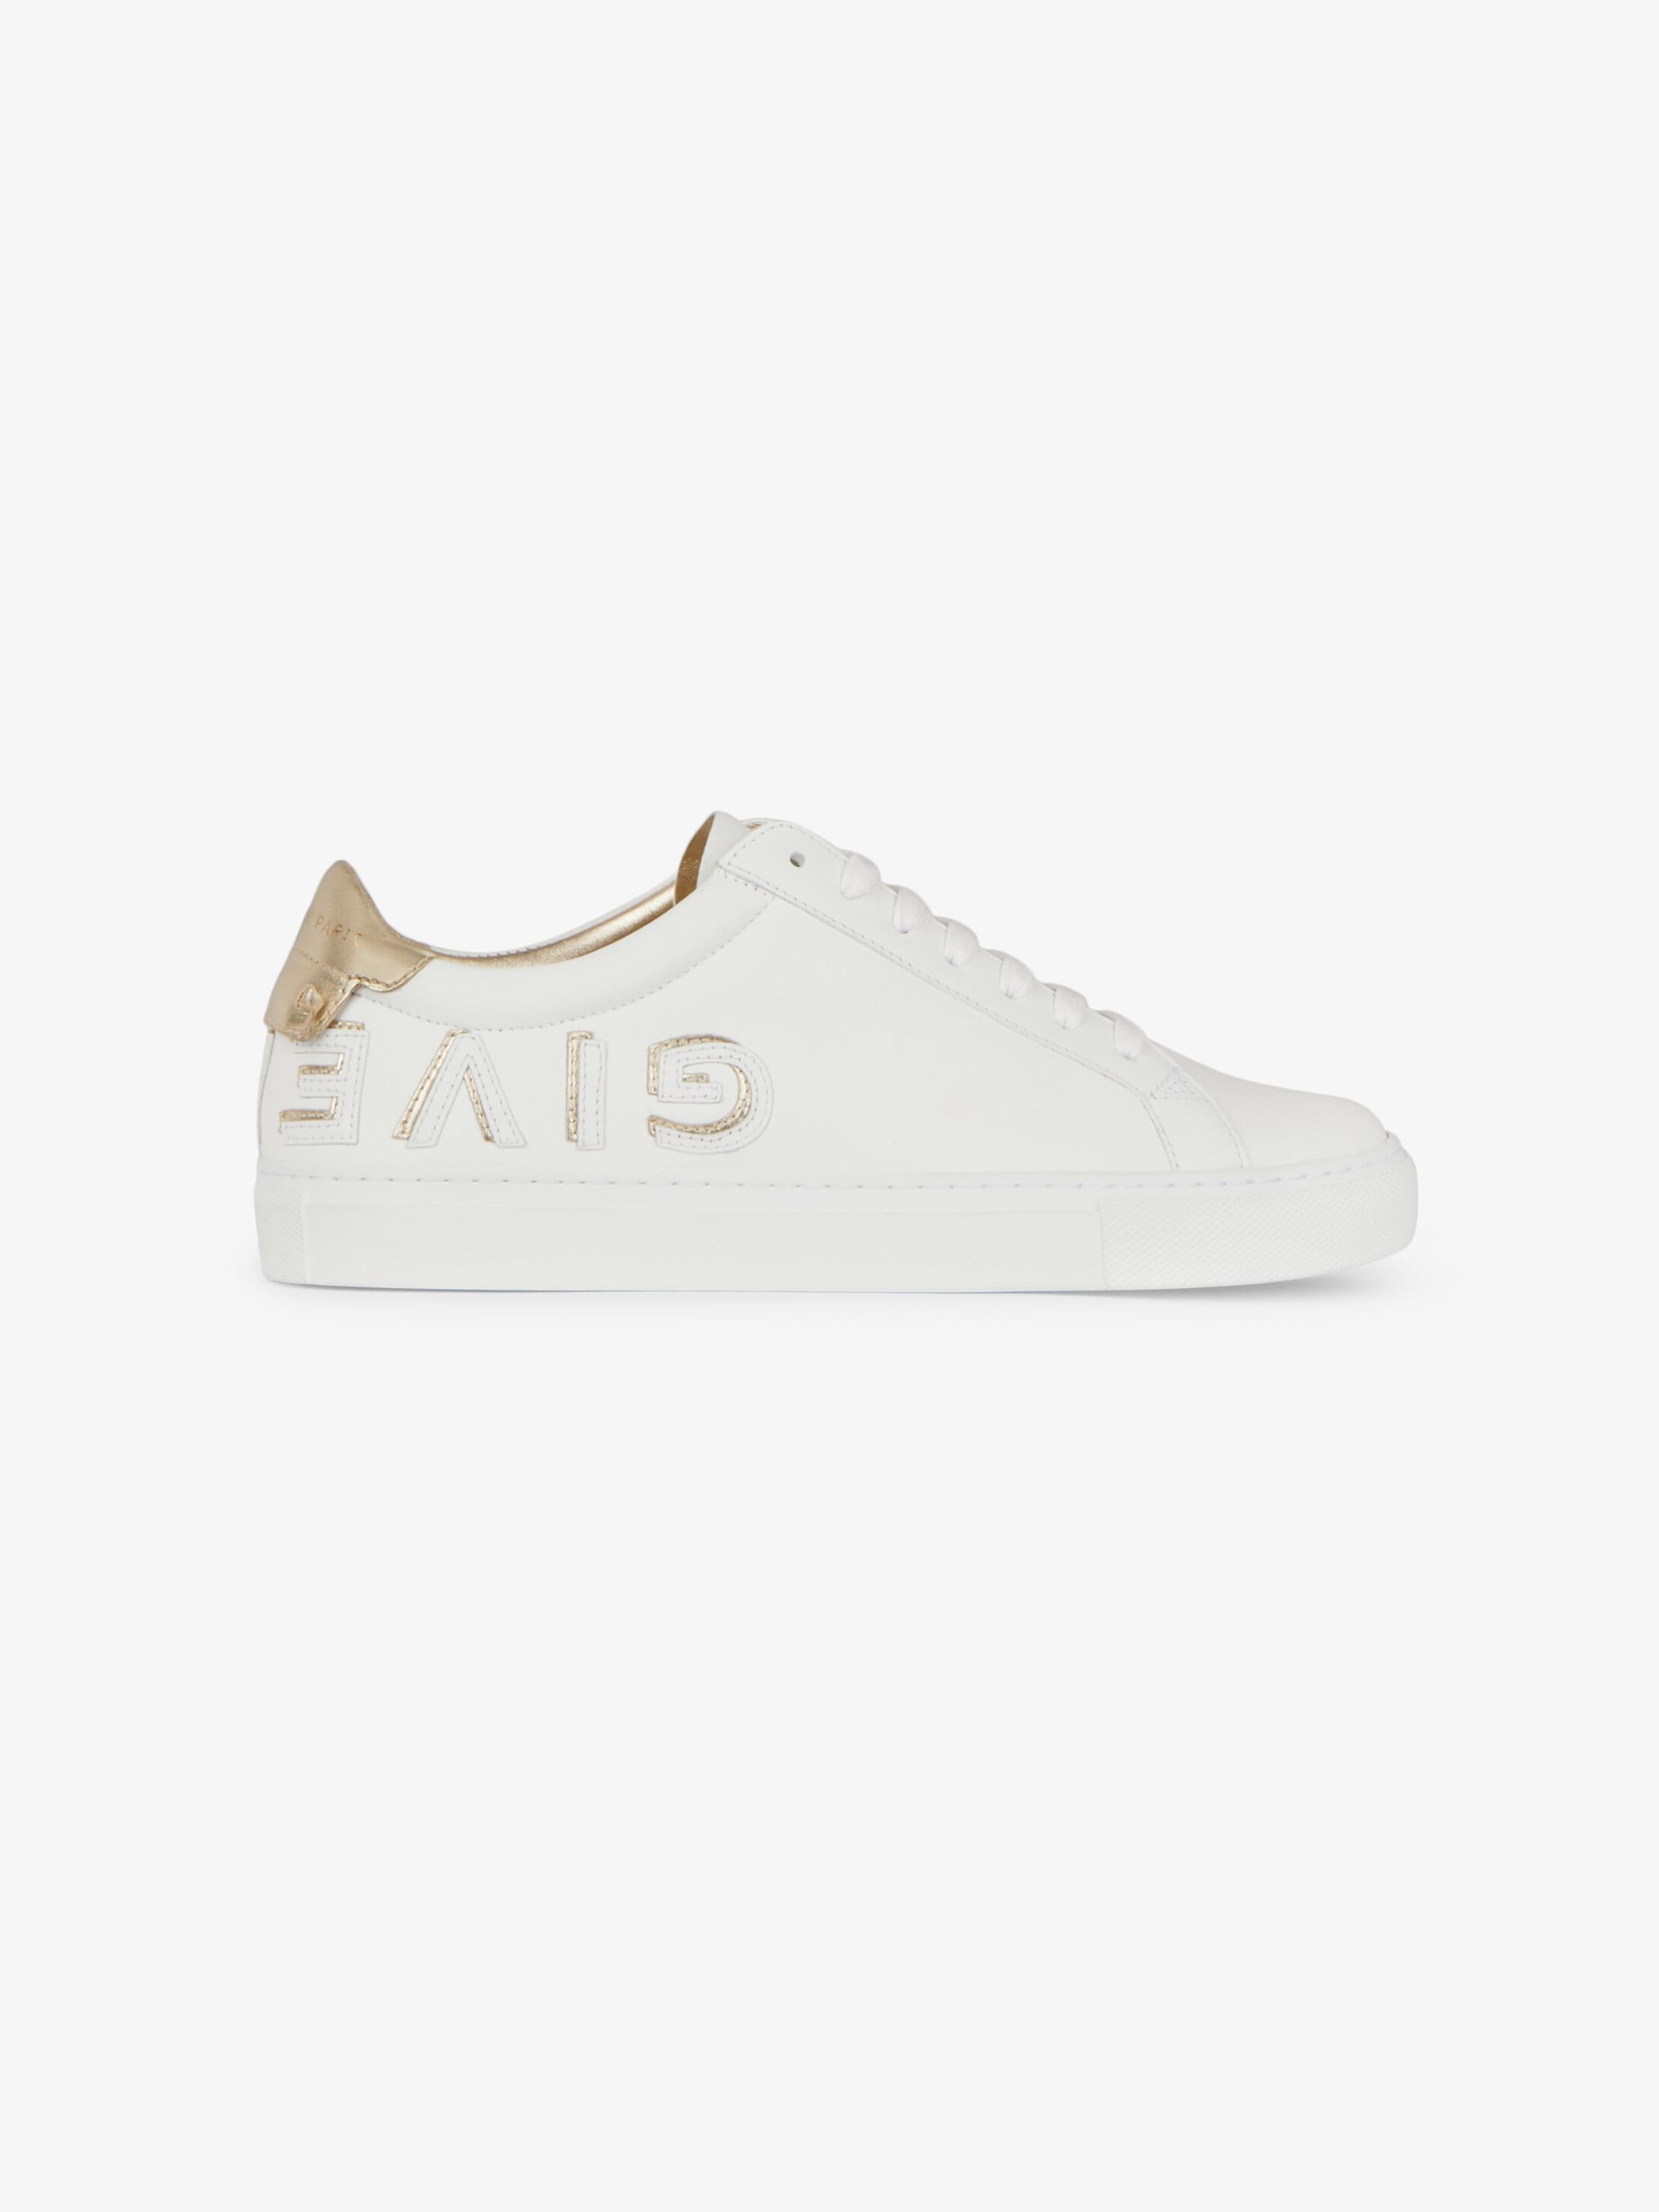 givenchy sneakers on sale